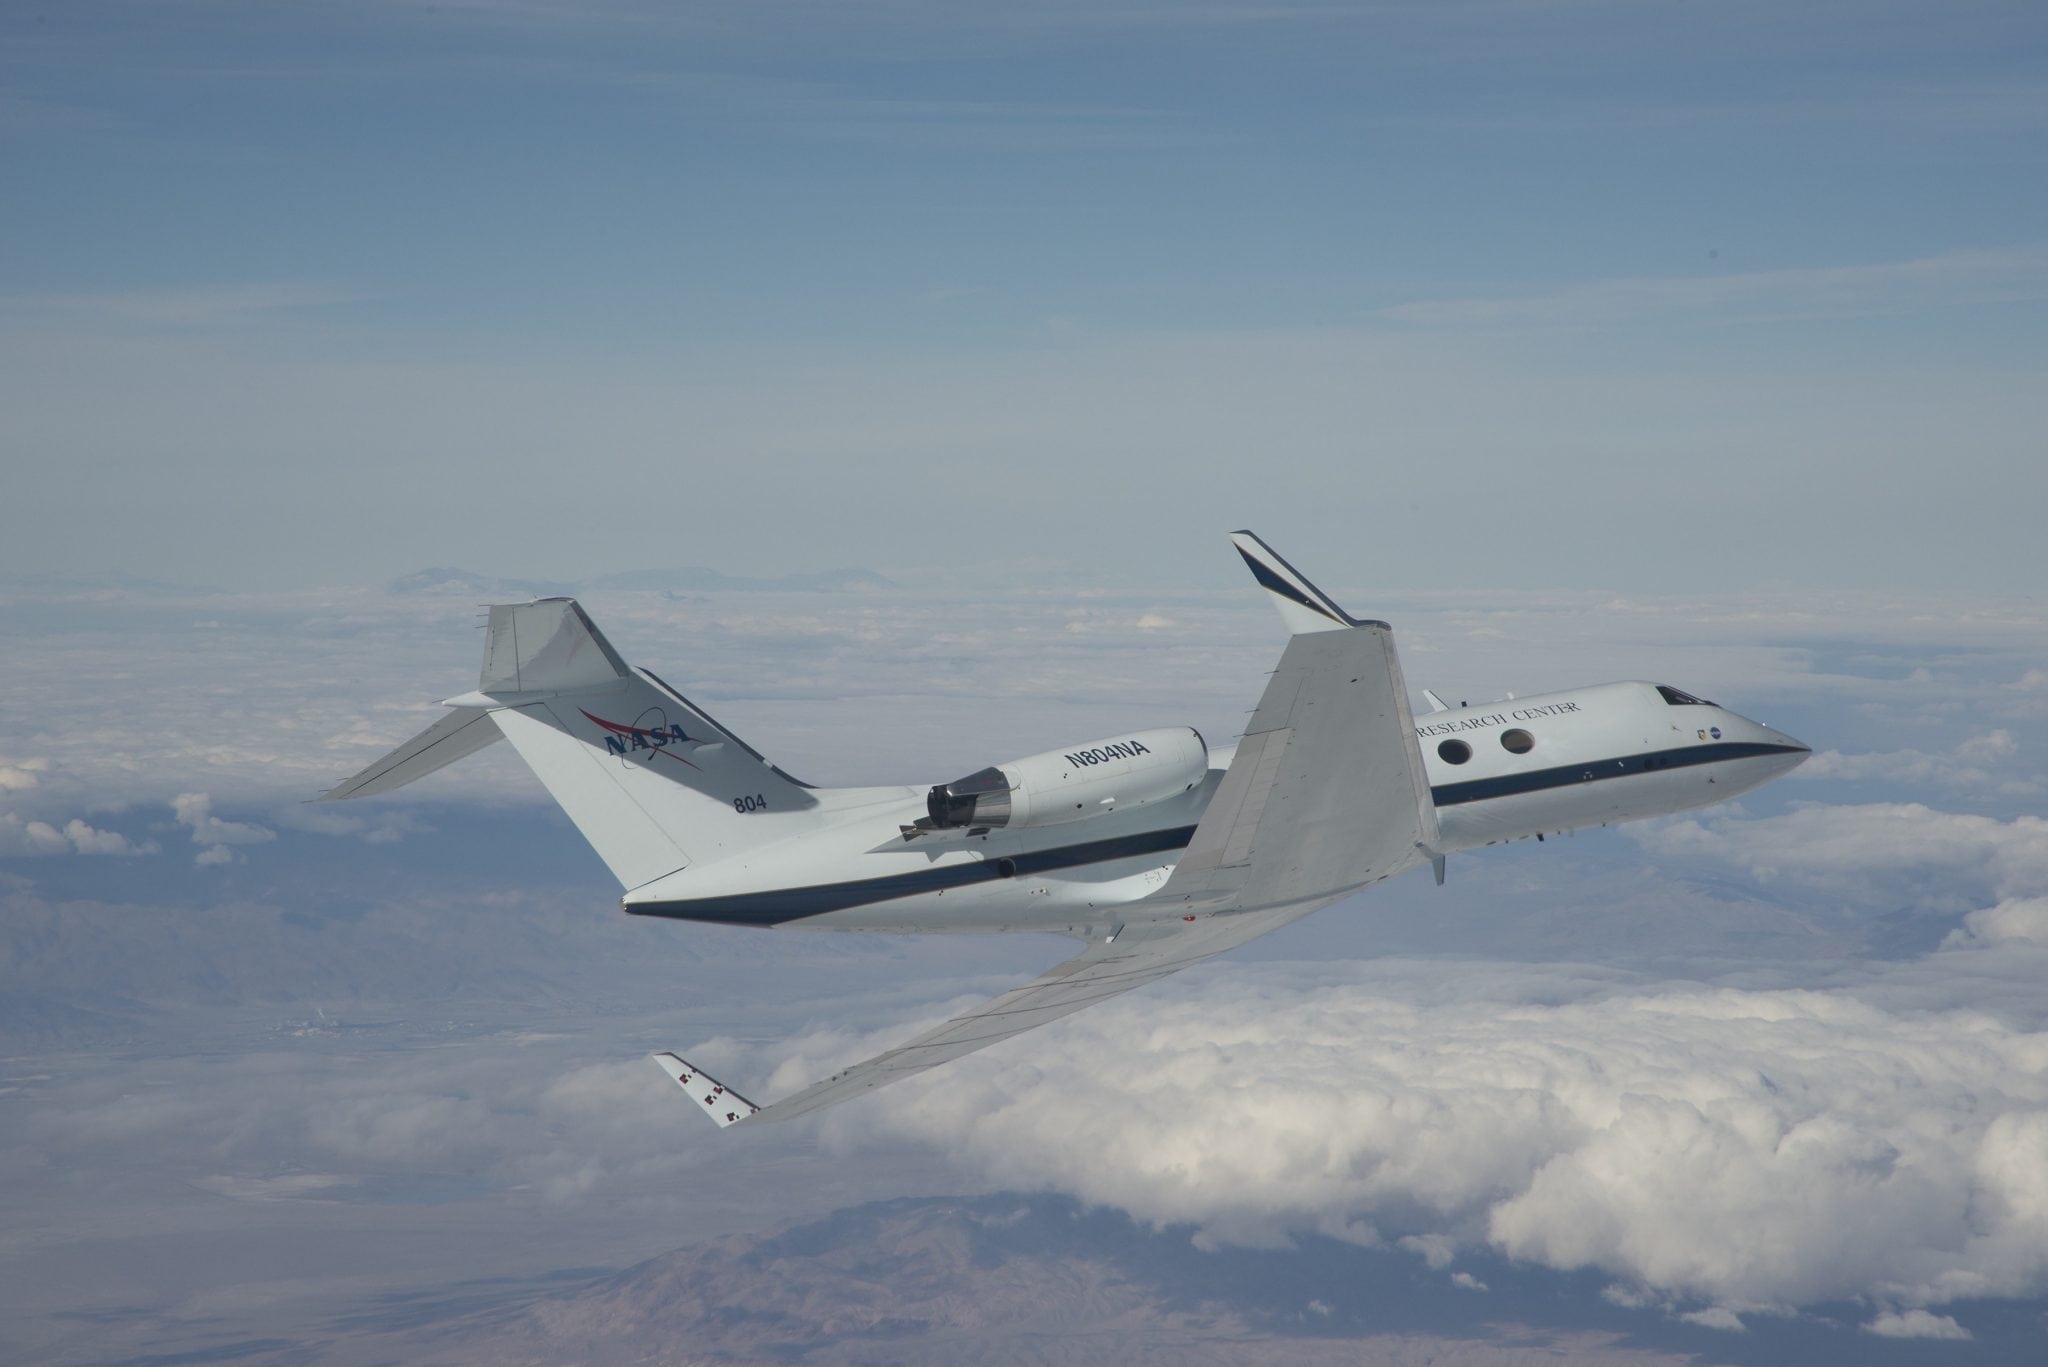 Test aircraft fitted with shape shifting wing technology in the ACTE project